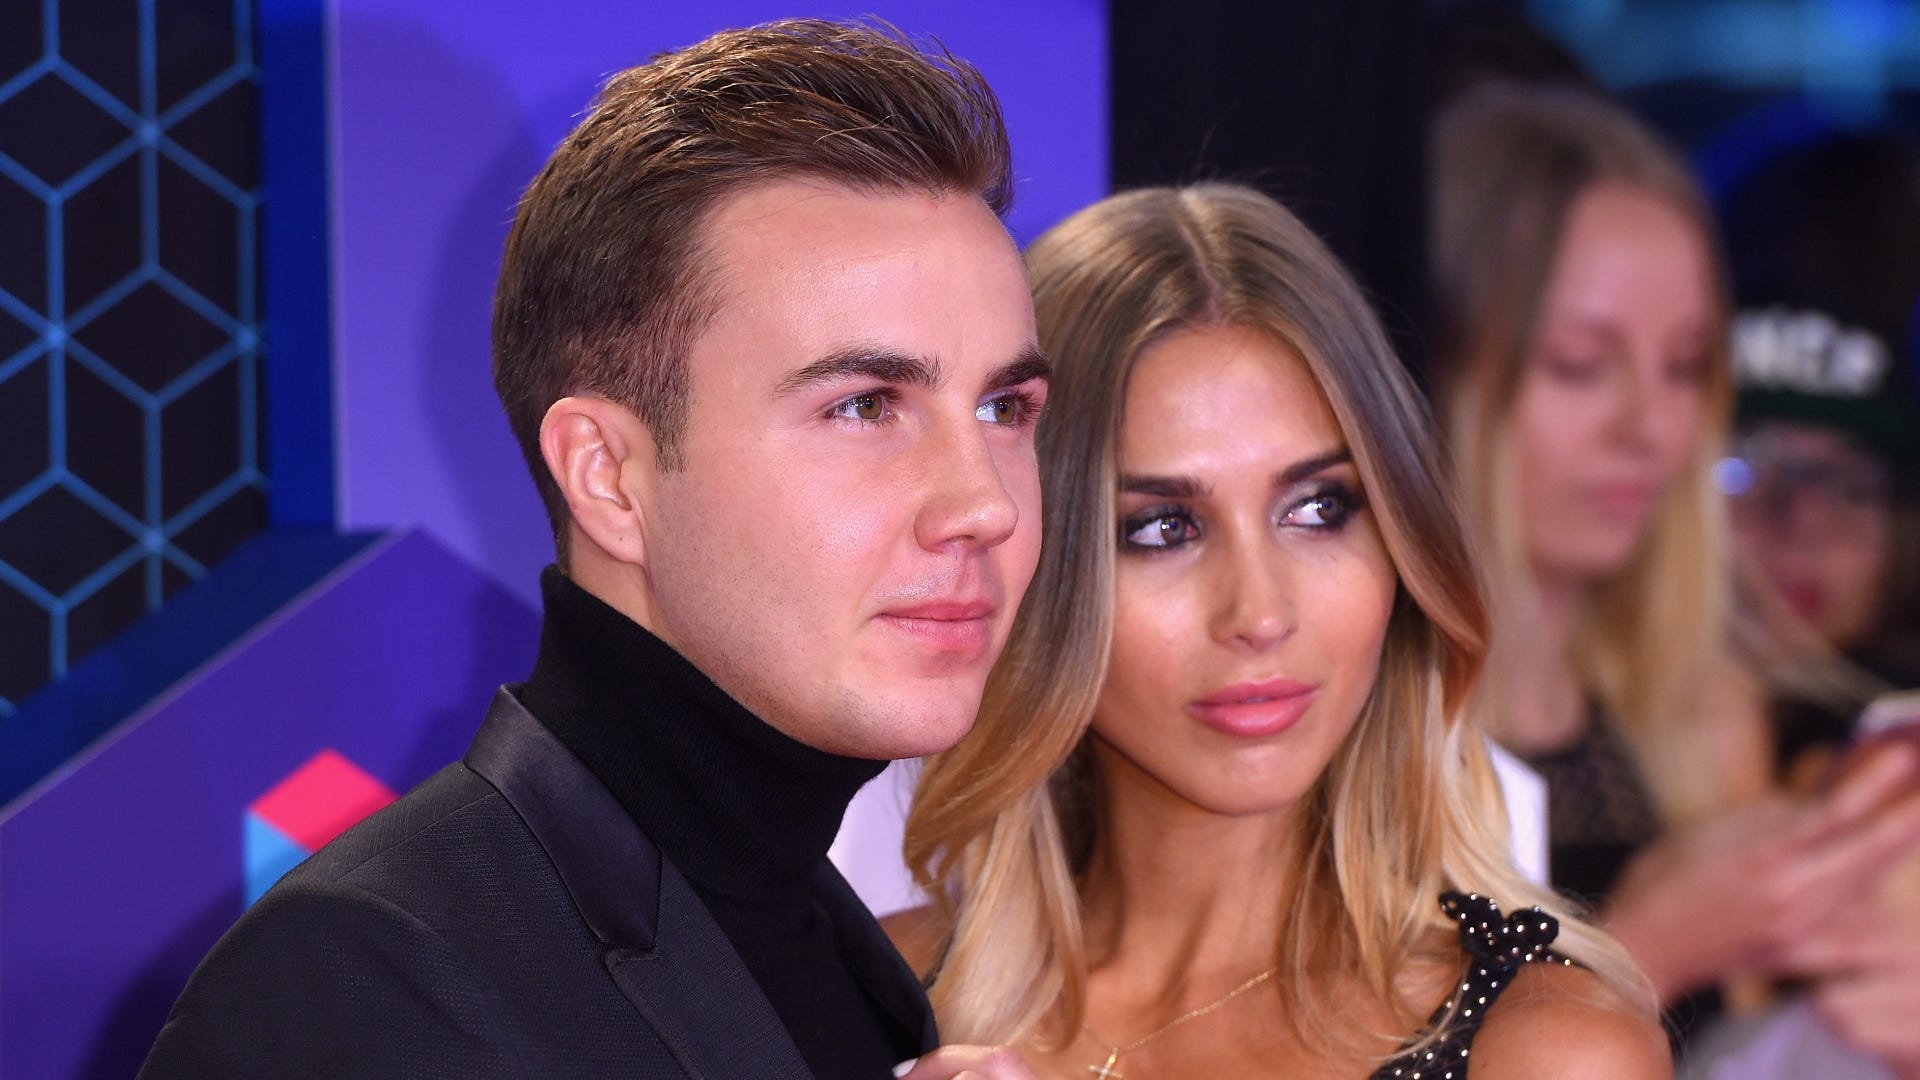 Image) Mario Gotze's Girlfriend Bares All In Bed! Ann-Kathrin